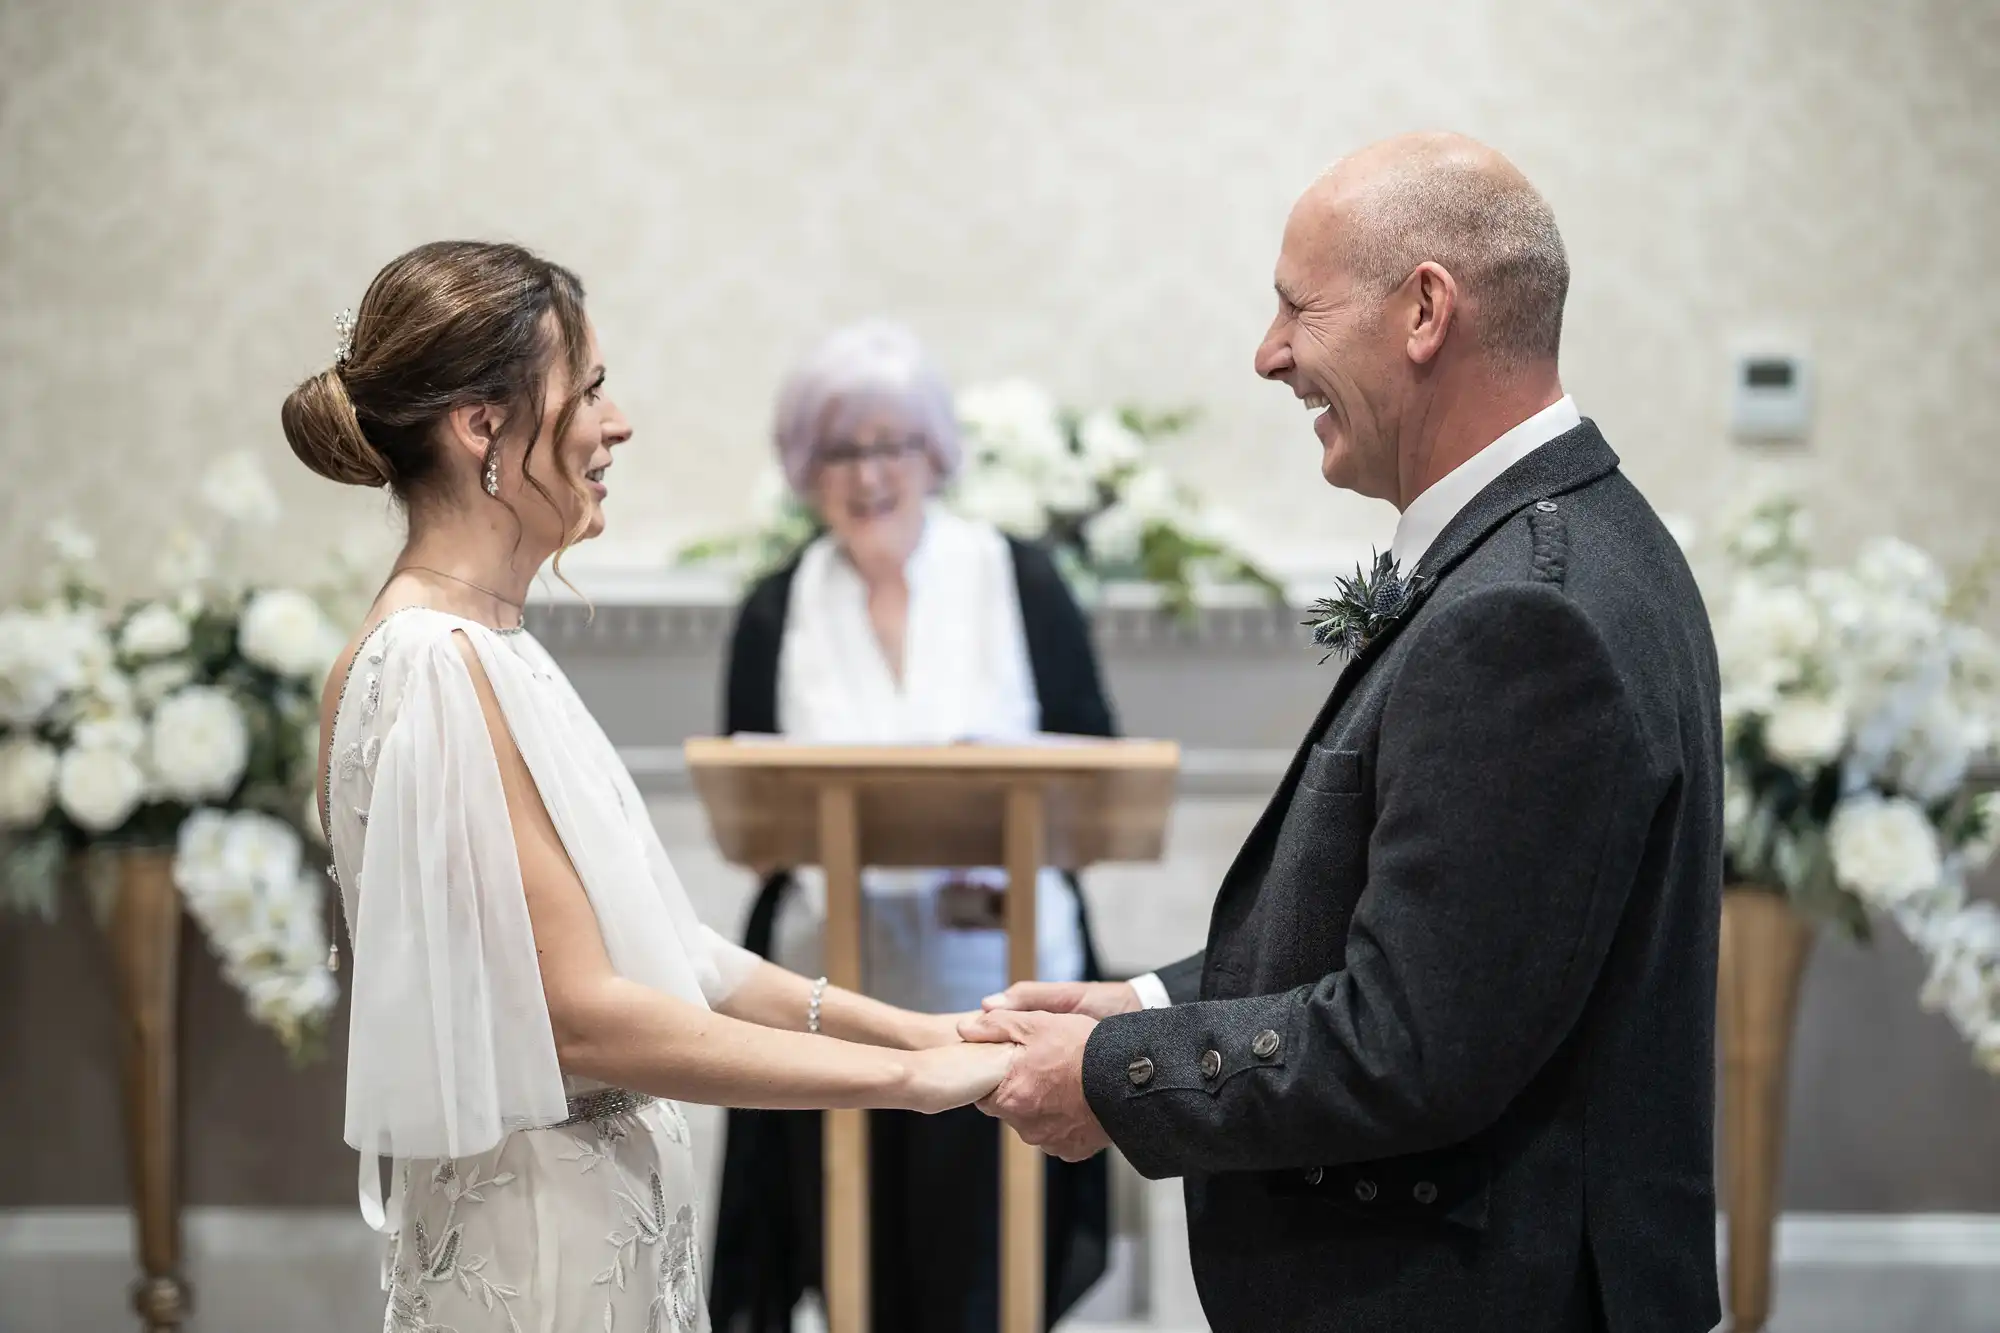 A couple holds hands and smiles at each other during their wedding ceremony, with an officiant standing behind them. The room is decorated with white flowers.